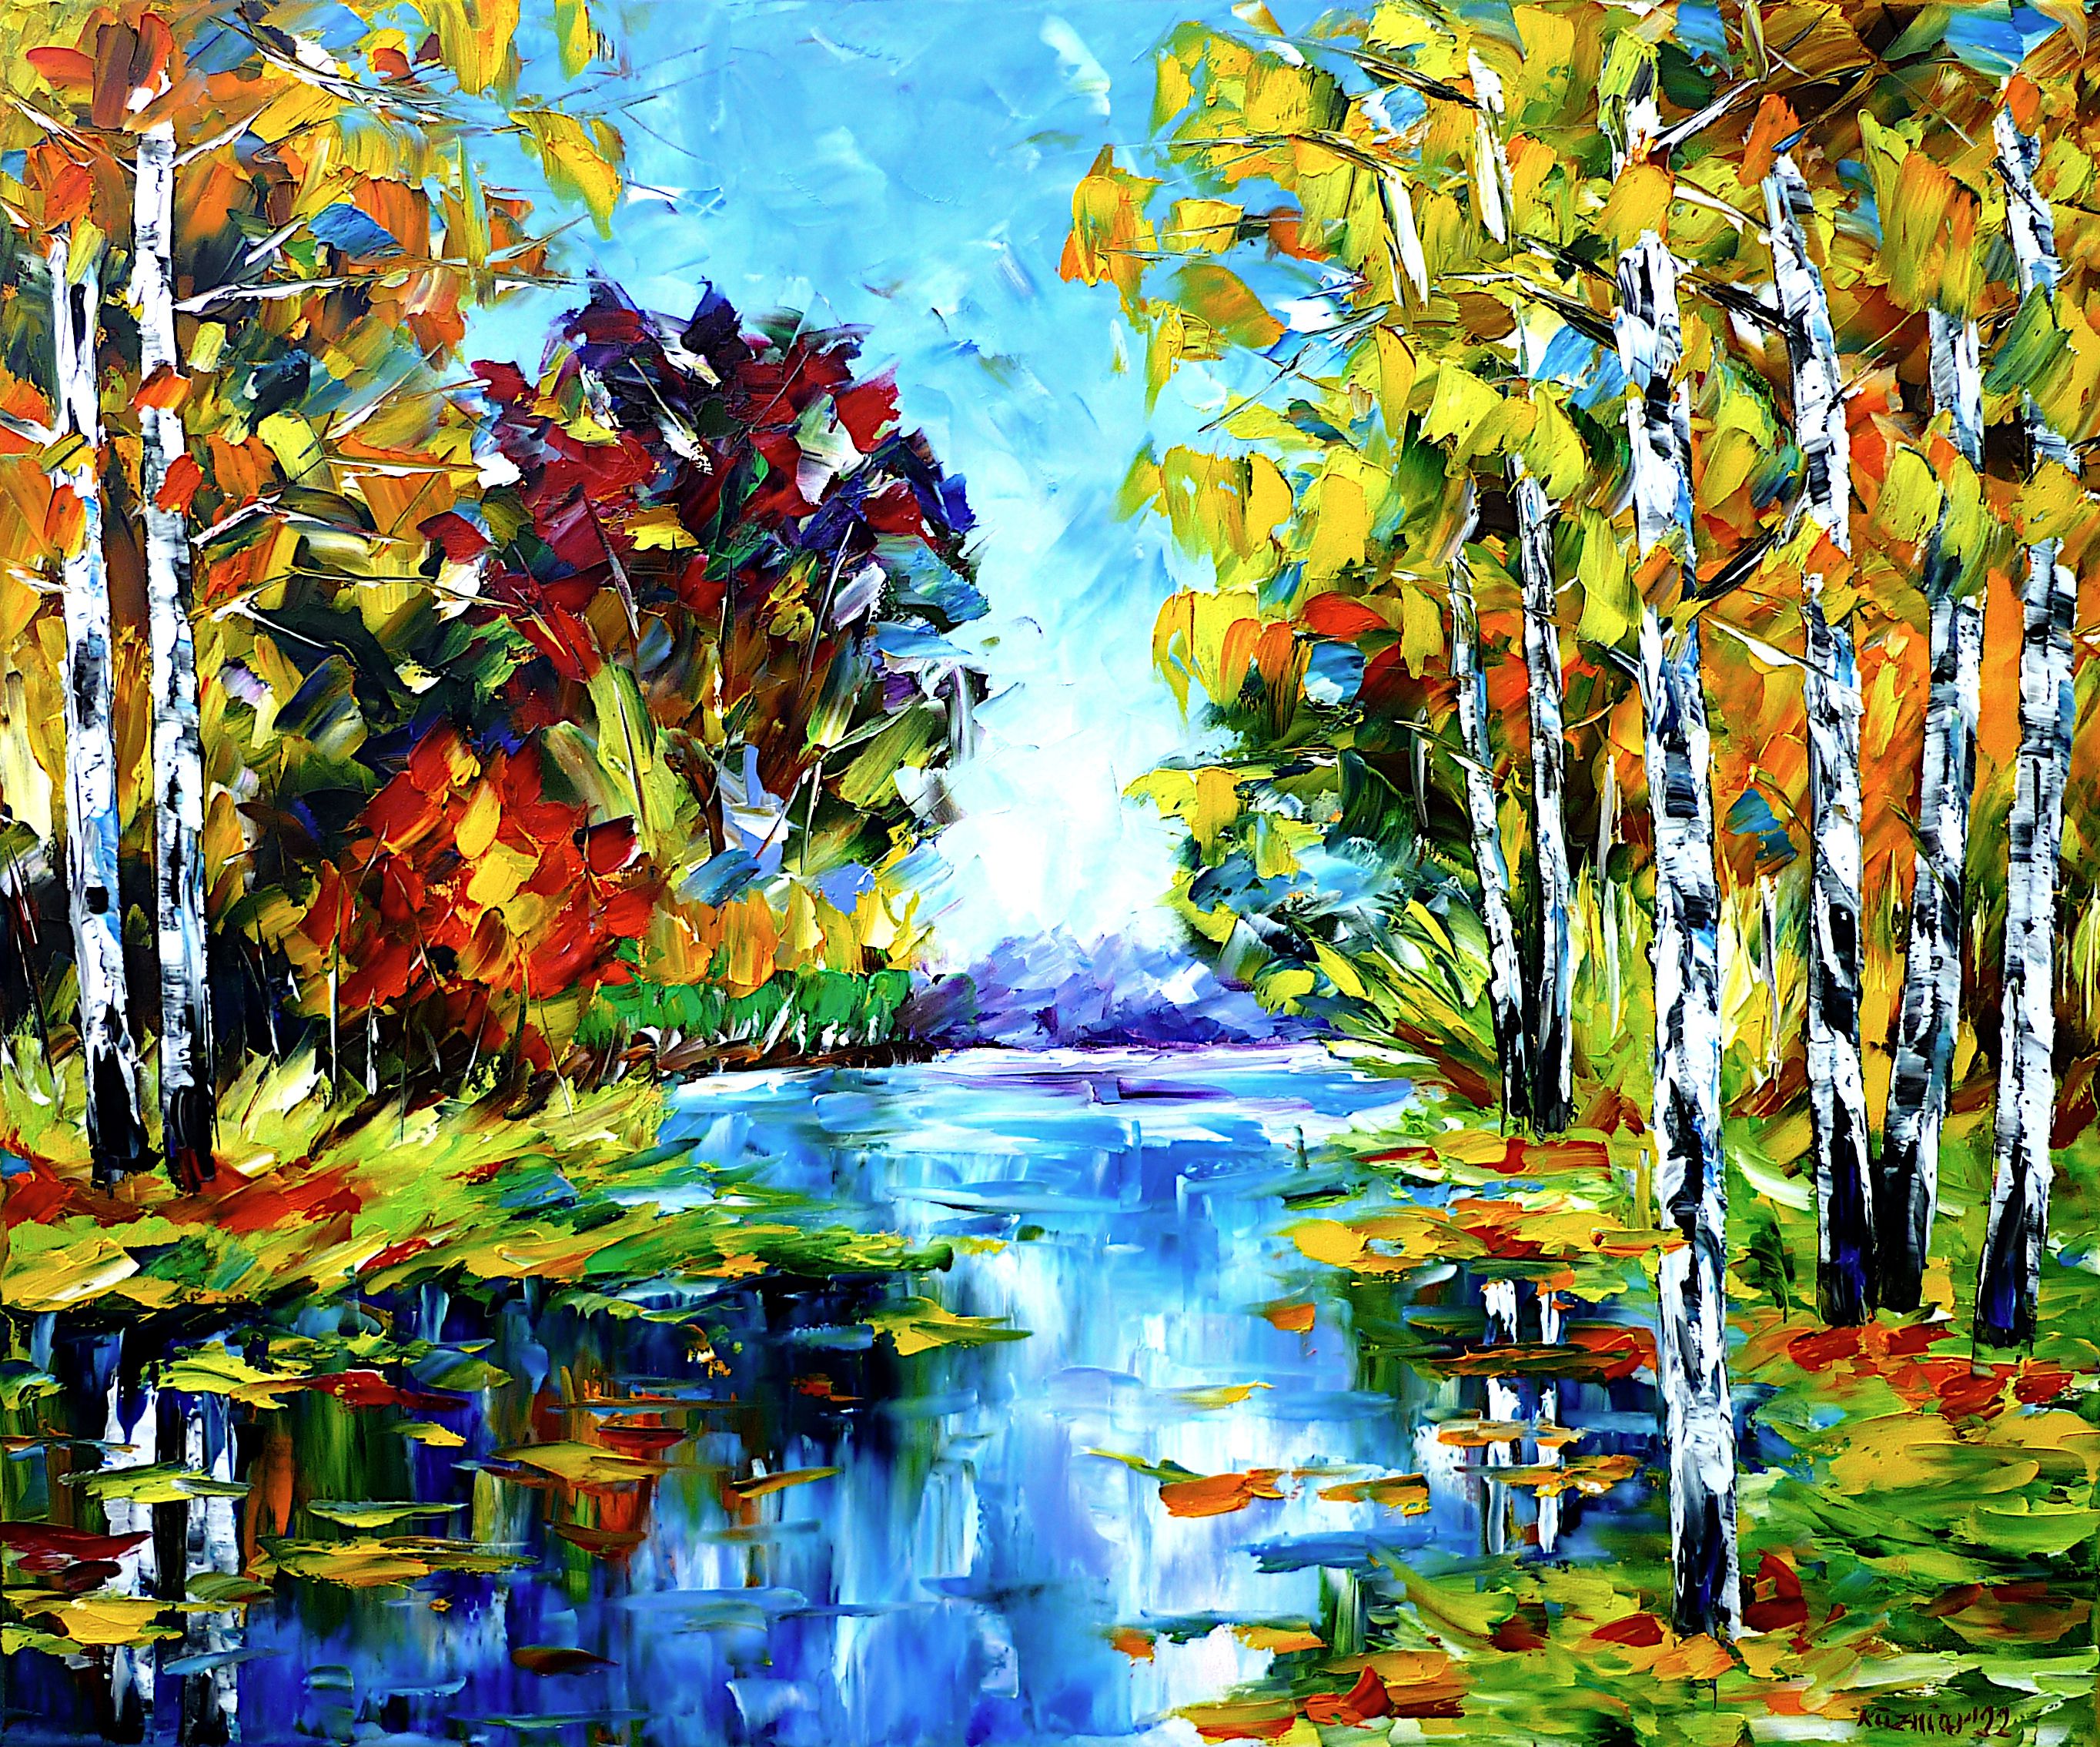 birch trees,birch forest,birch trees in autumn,birch trees by the river,autumn forest,birch landscape,yellow colors,yellow landscape,river landscape,autumn painting,forest in autumn,autumn river,autumn landscape,autumn trees,colorful autumn,lively autumn,autumn colors,autumn picture,forest river,forest with river,autumn abstract,yellow autumn,by the river,autumn leaves,autumn beauty,beautiful autumn,autumn impression,autumn,autumn love,autumn romance,forest landscape,forest painting,forest picture,landscape painting,palette knife oil painting,modern art,impressionism,abstract painting,lively colors,colorful painting,bright colors,light reflections,impasto painting,figurative